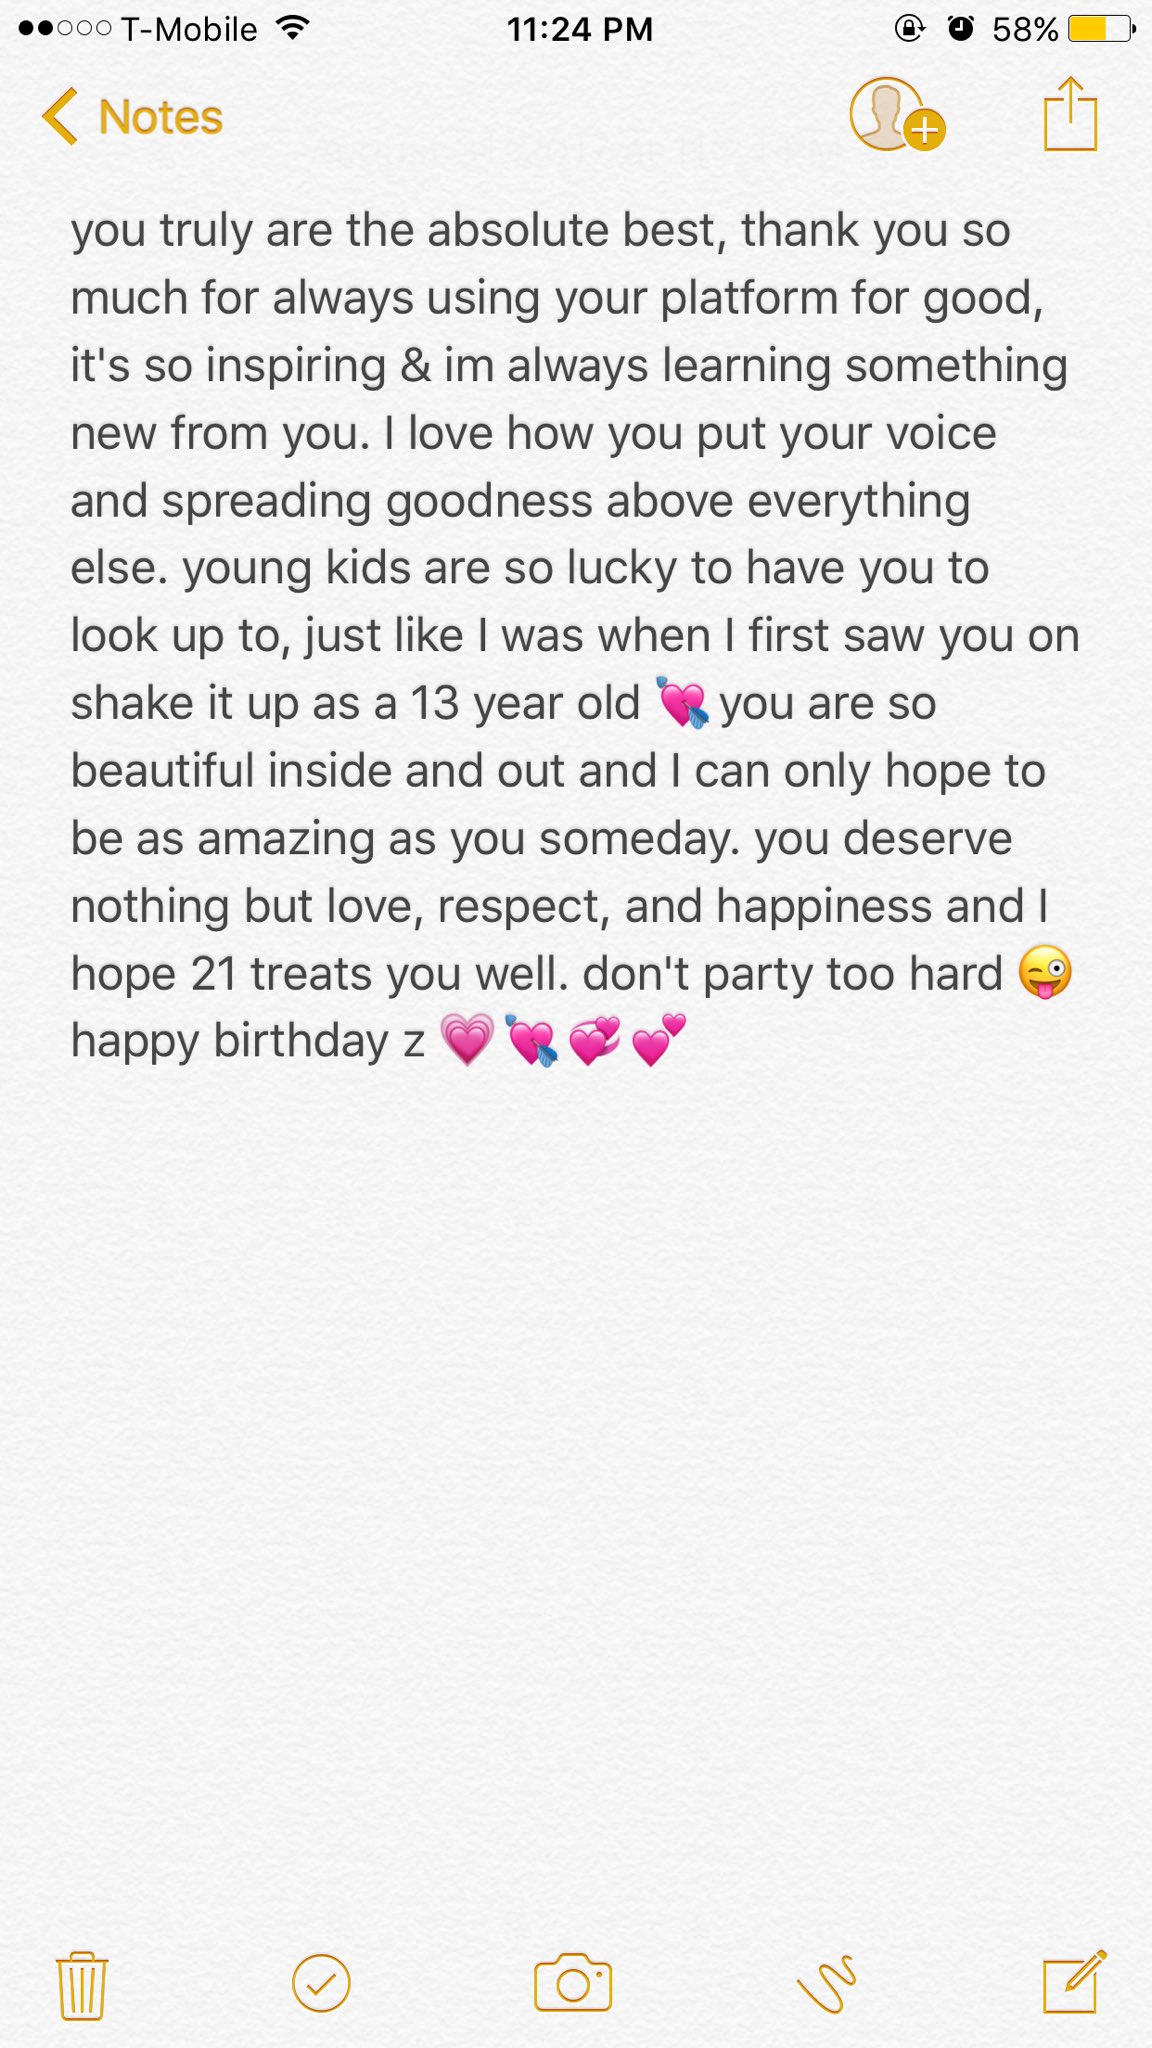   couldn\t fit it in a message, happy birthday z 